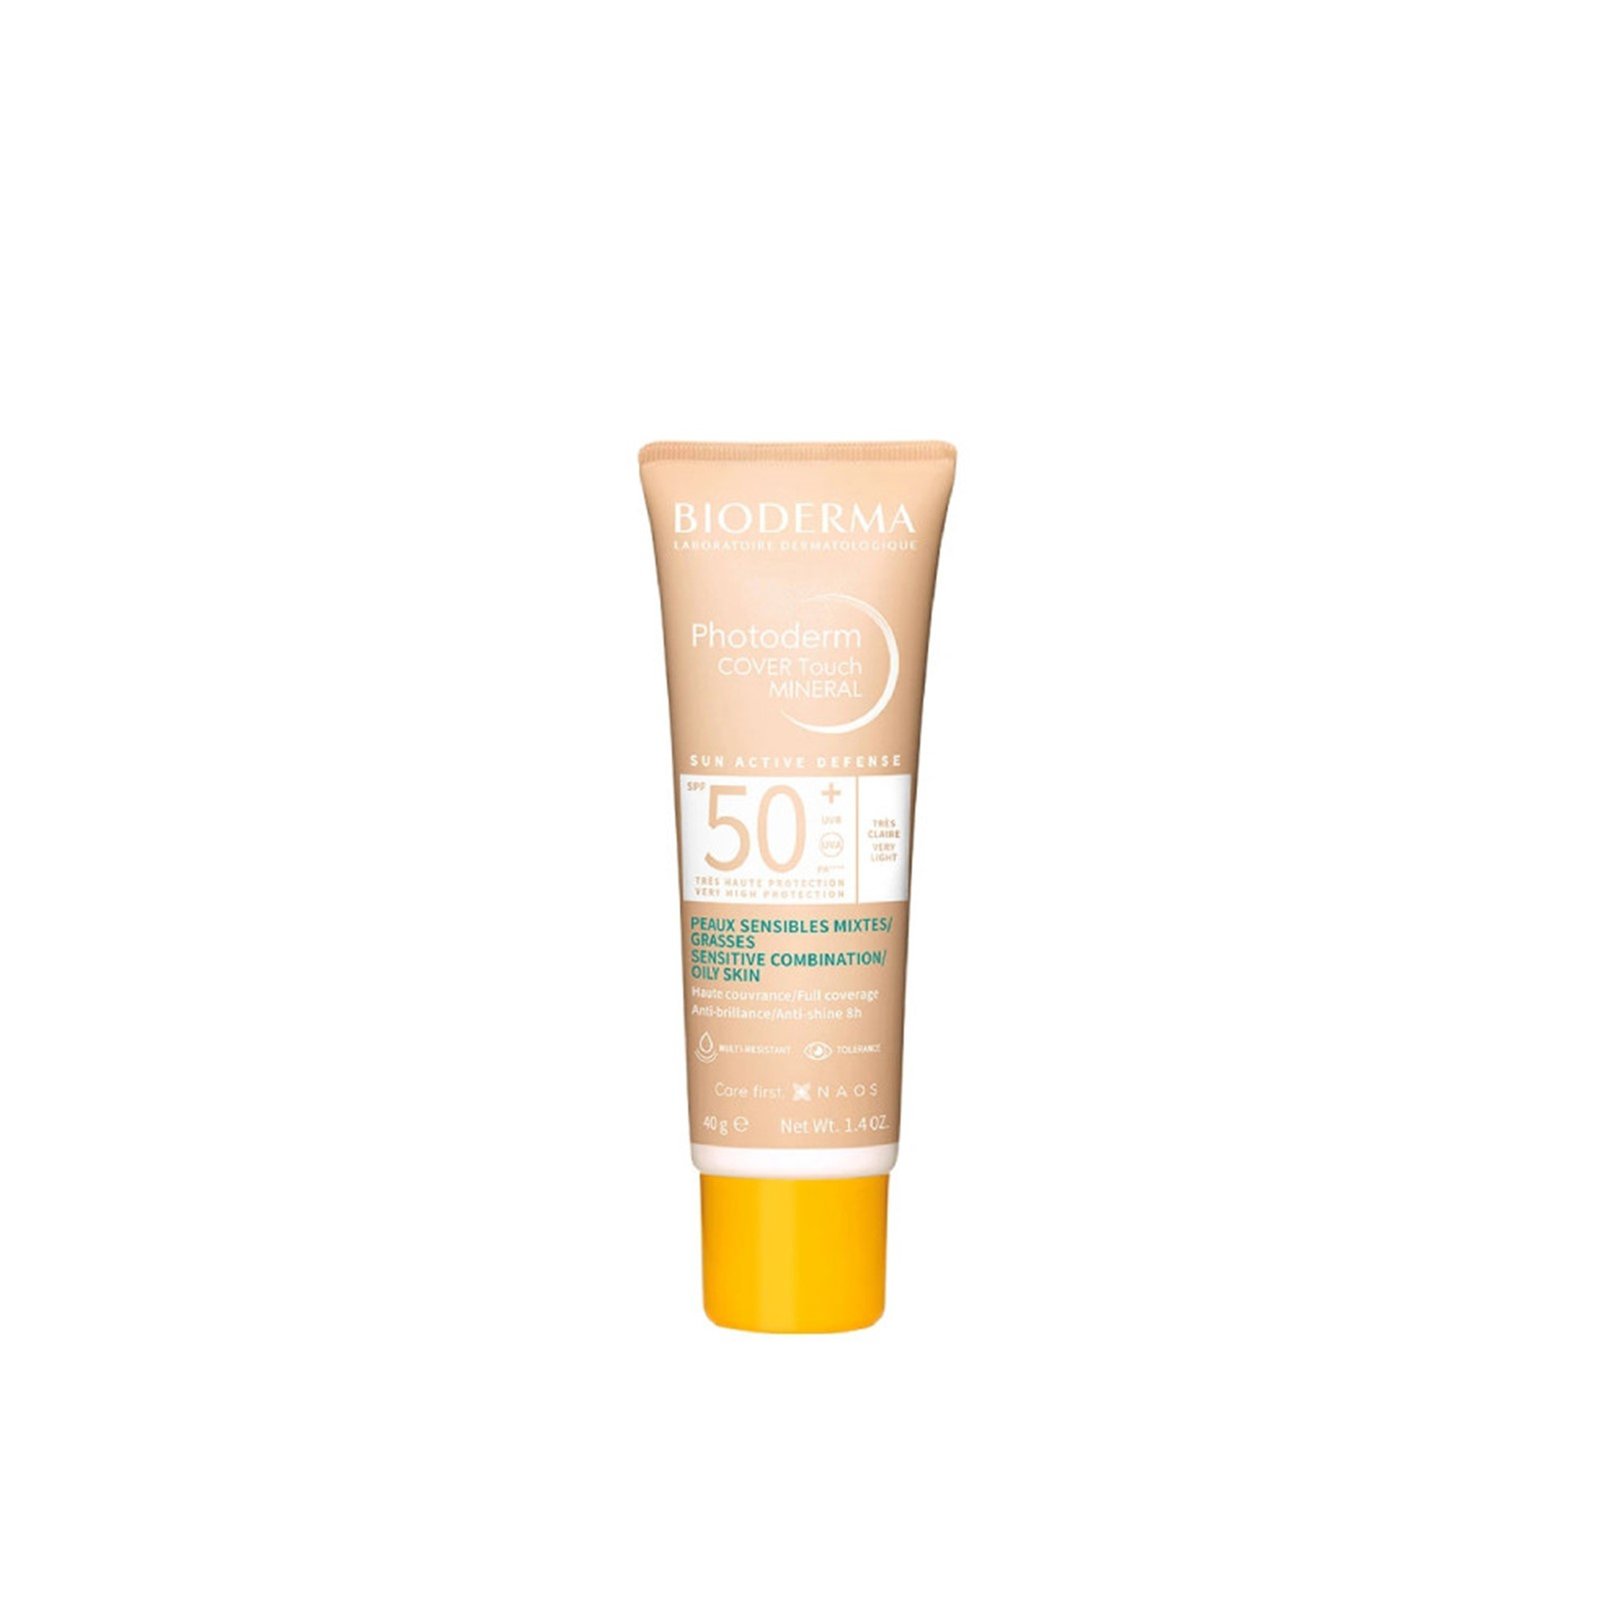 Bioderma Photoderm Cover Touch Mineral SPF50+ Very Light 40g (1.4oz)